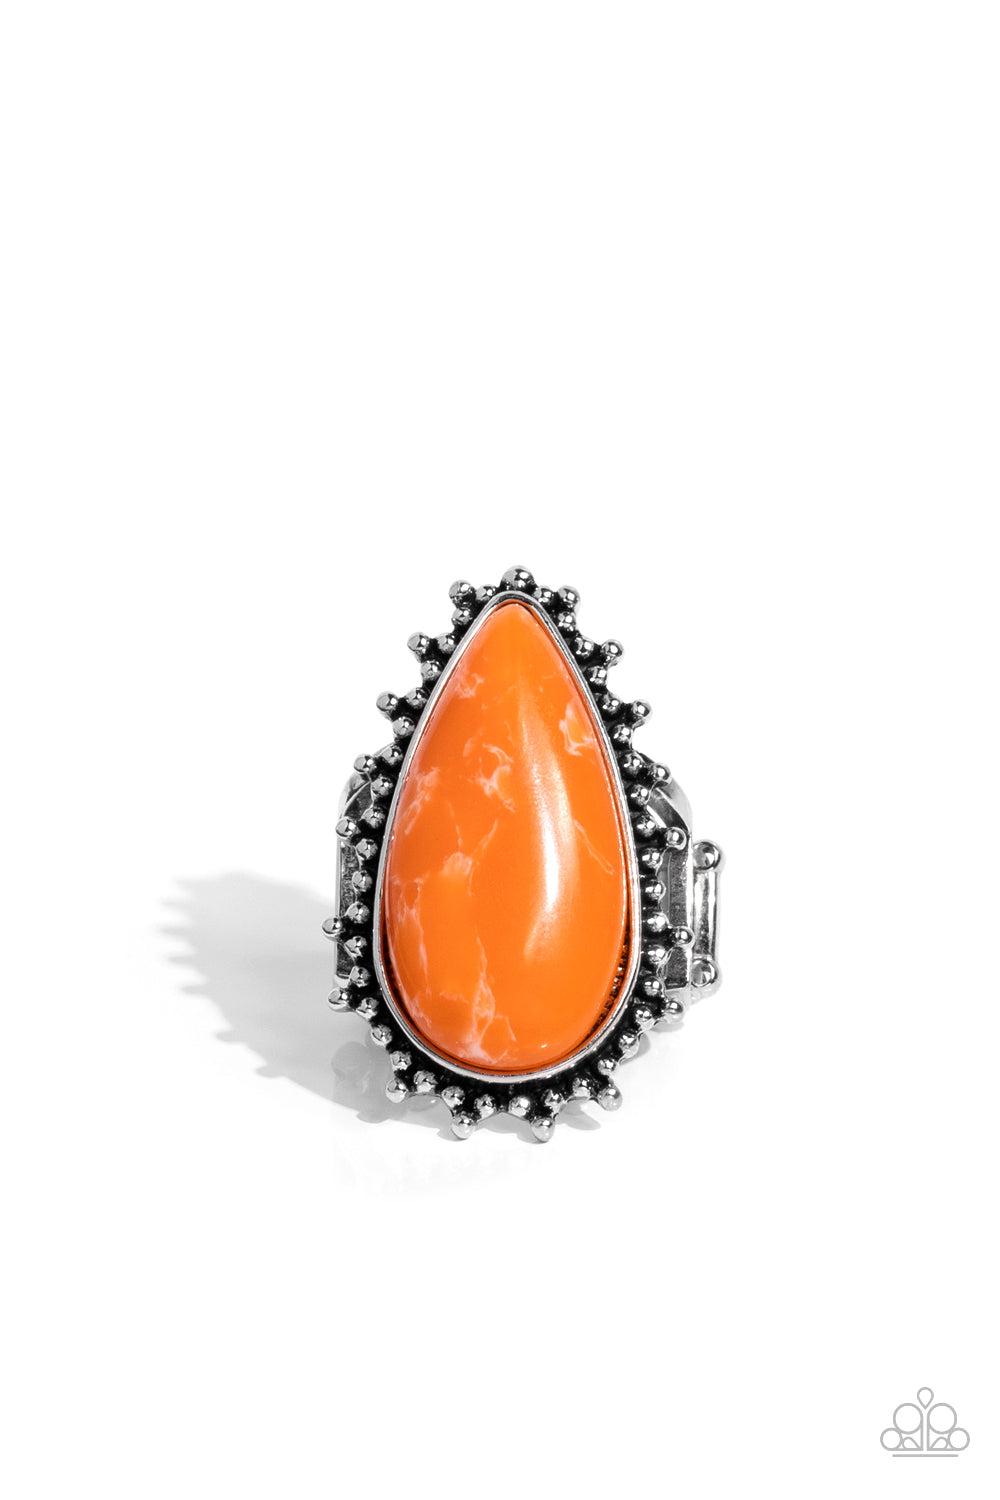 Down-to-Earth Essence Orange Stone Ring - Paparazzi Accessories- lightbox - CarasShop.com - $5 Jewelry by Cara Jewels